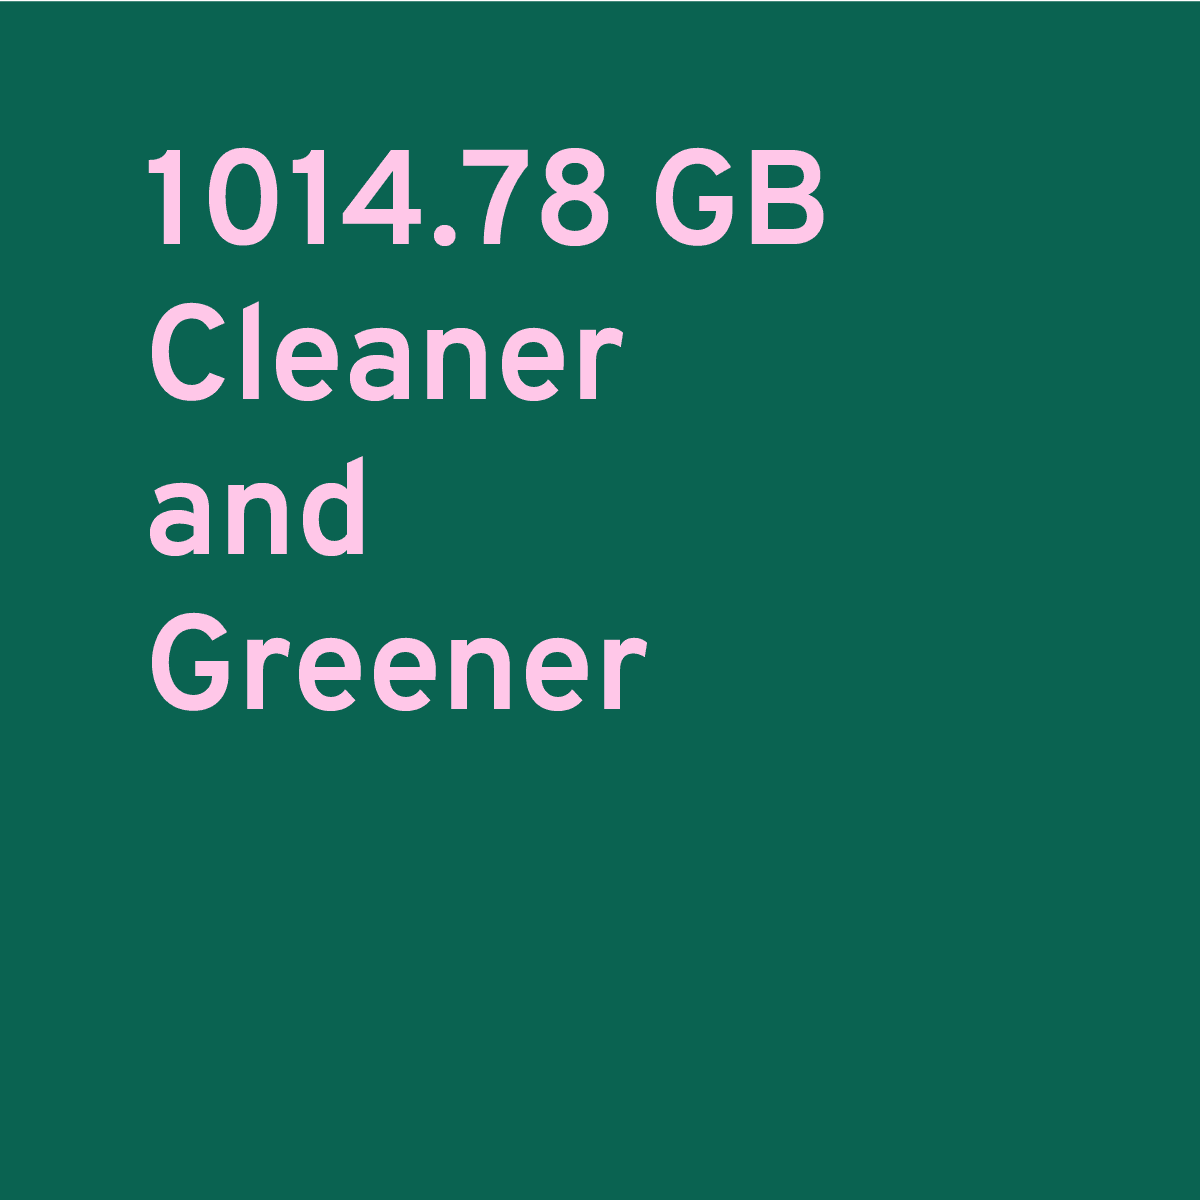 1014.78 GB cleaner and greener text